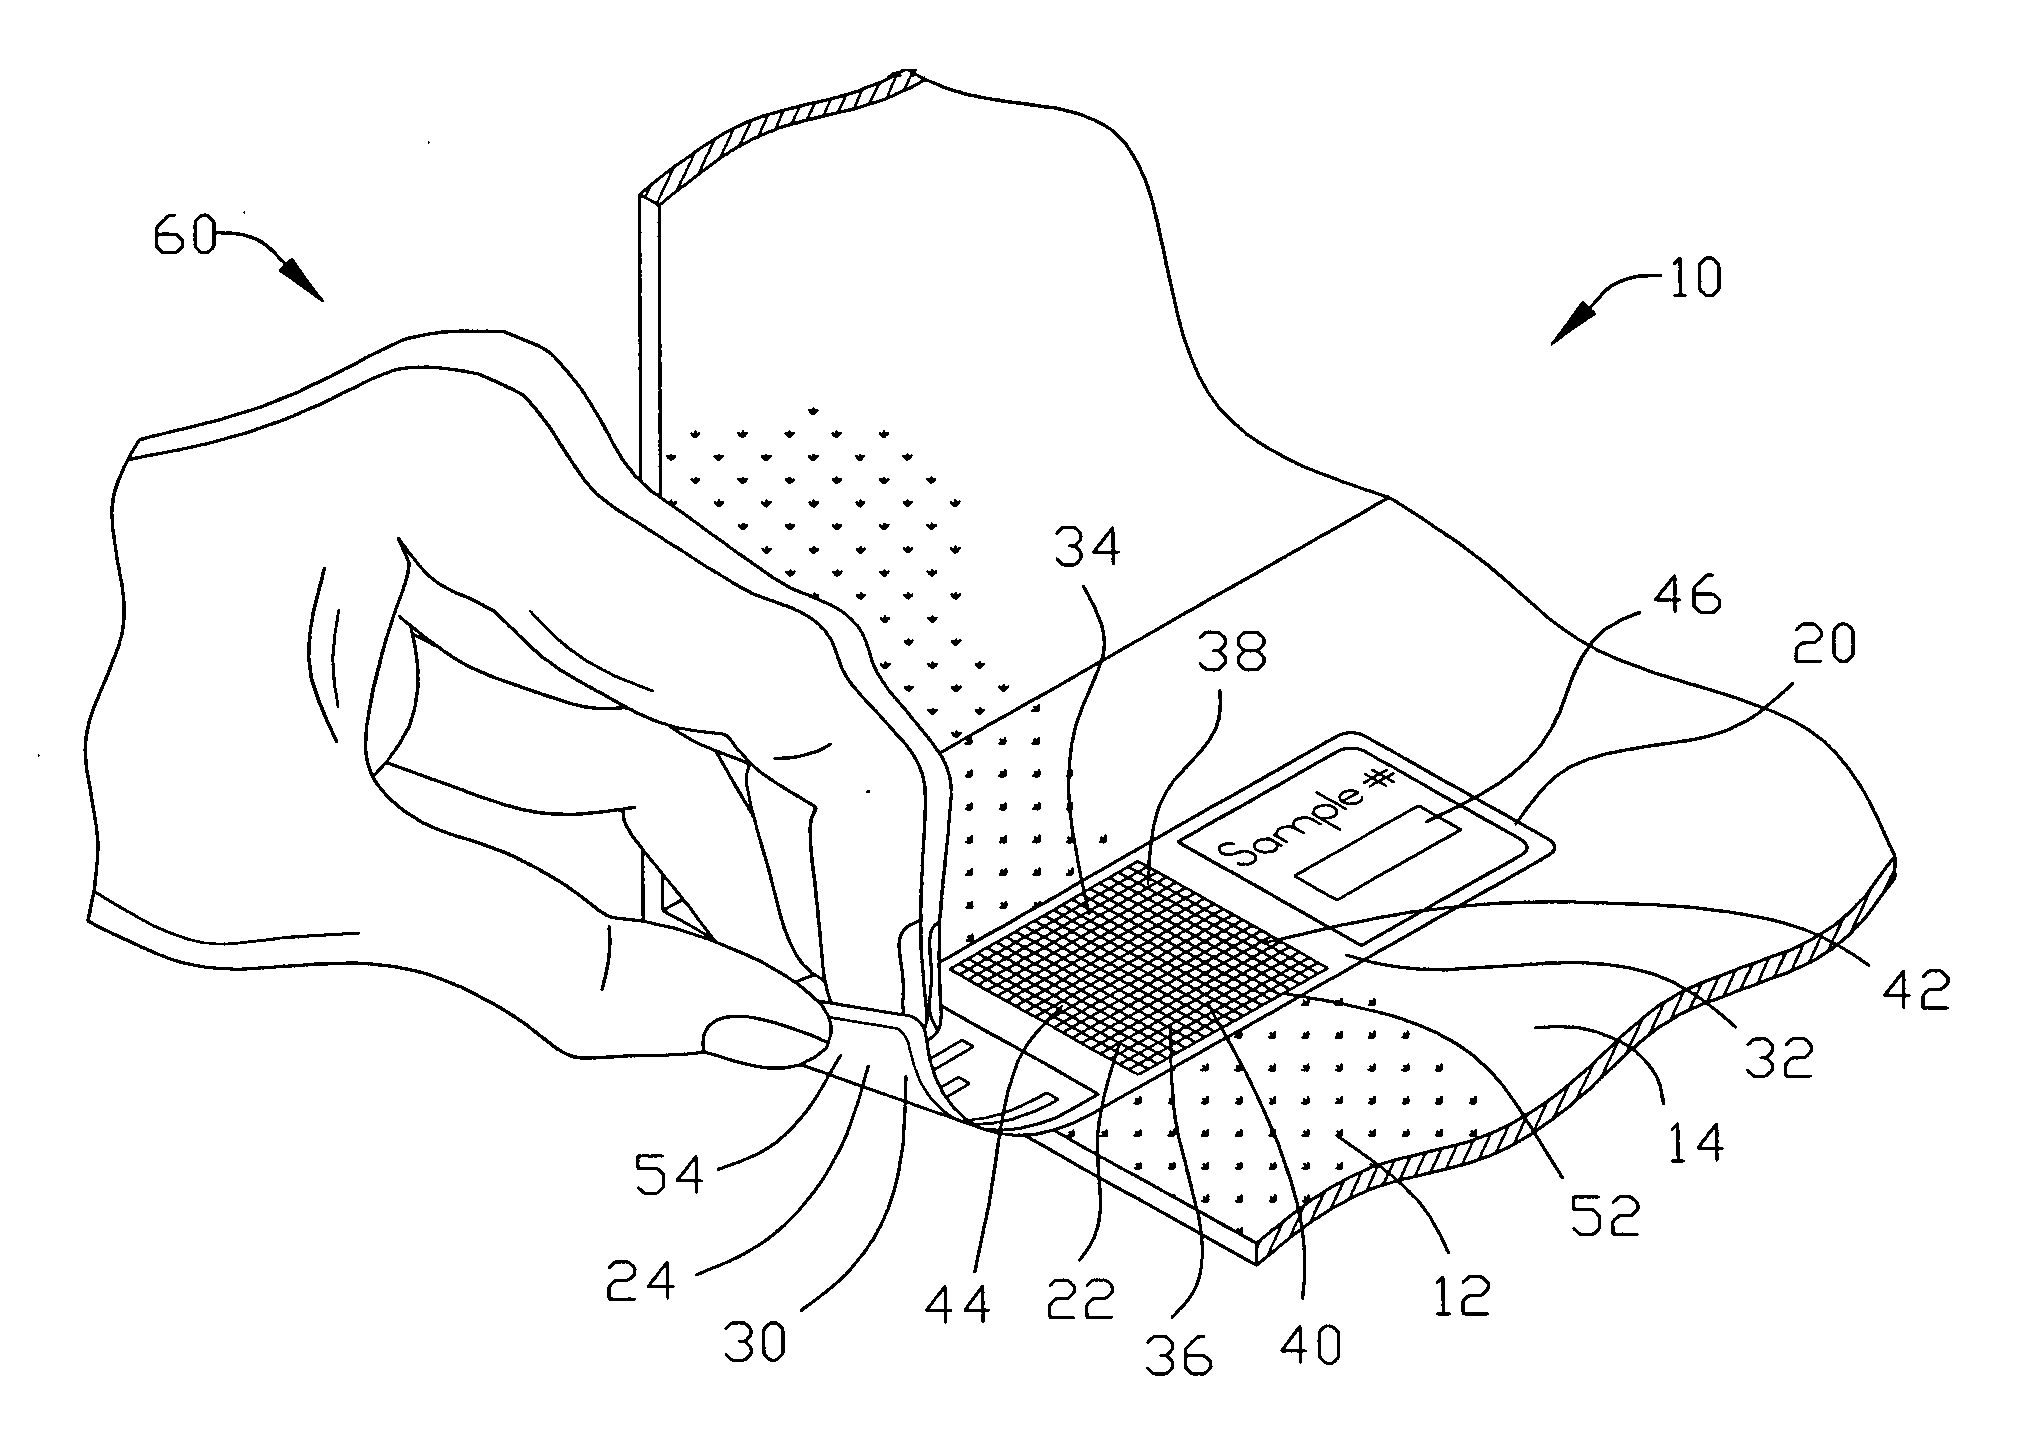 Apparatus and method of conveying constituents